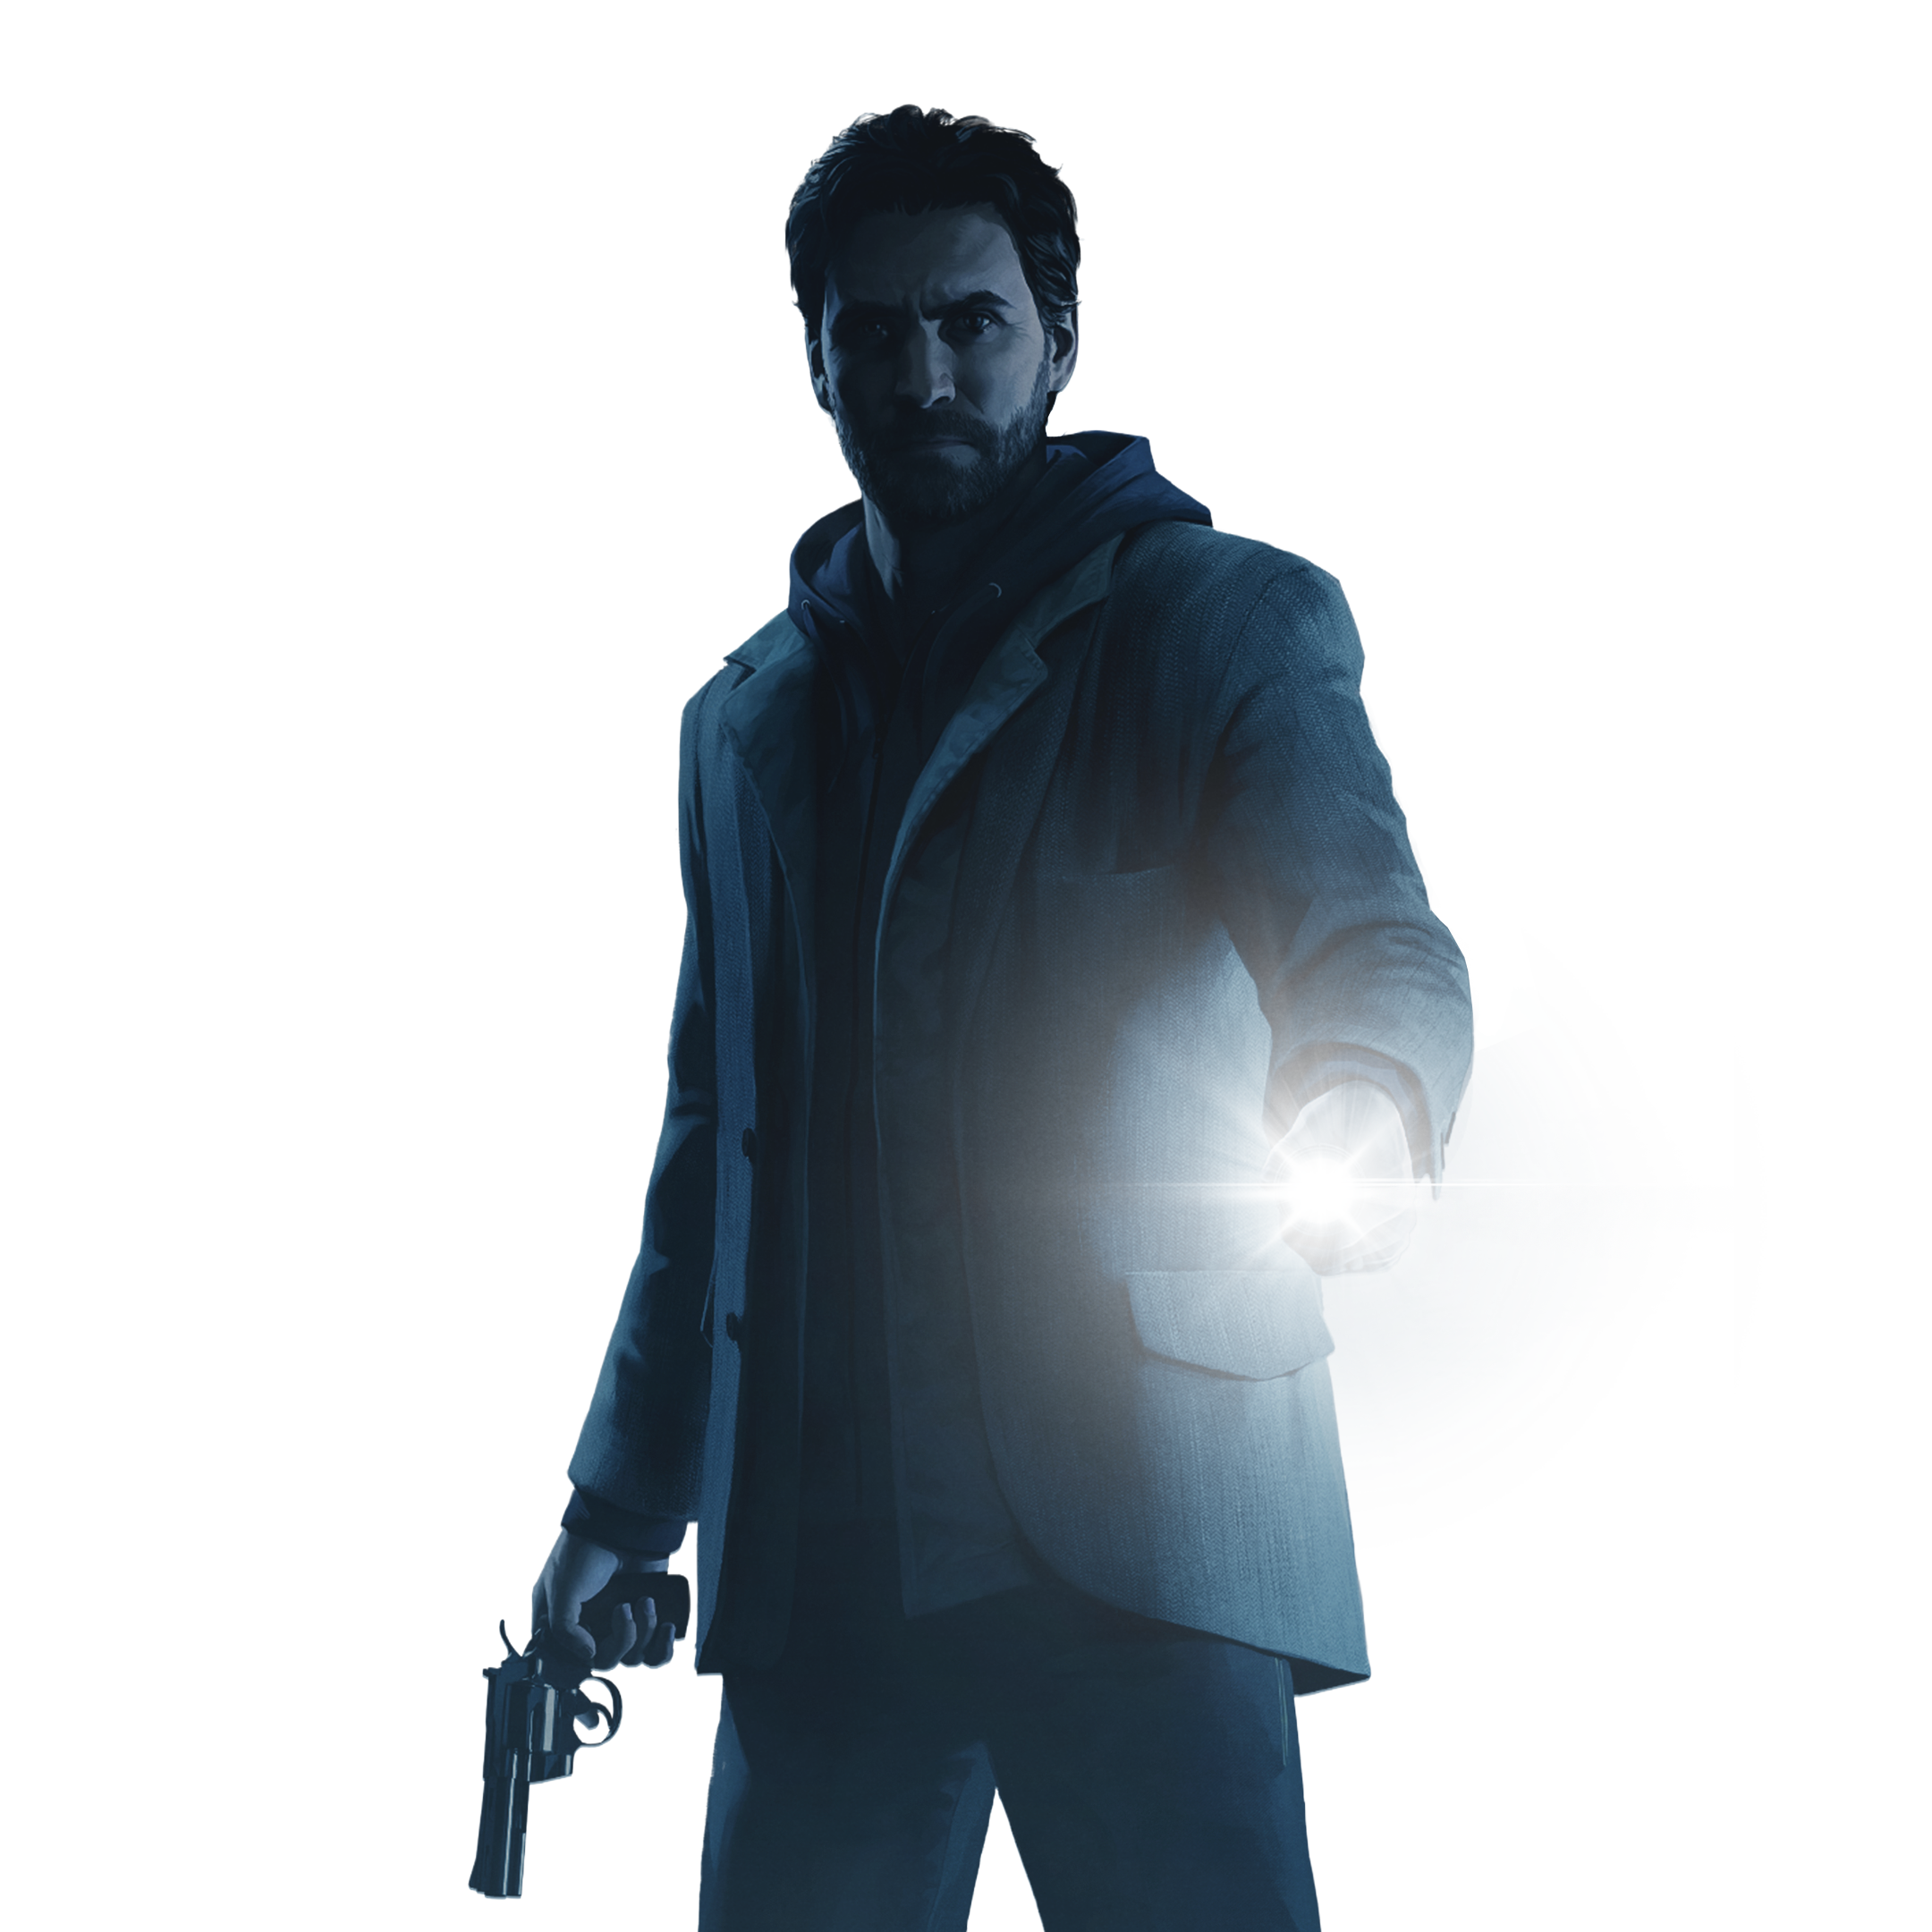 Alan Wake Remastered (PS4) cheap - Price of $9.37